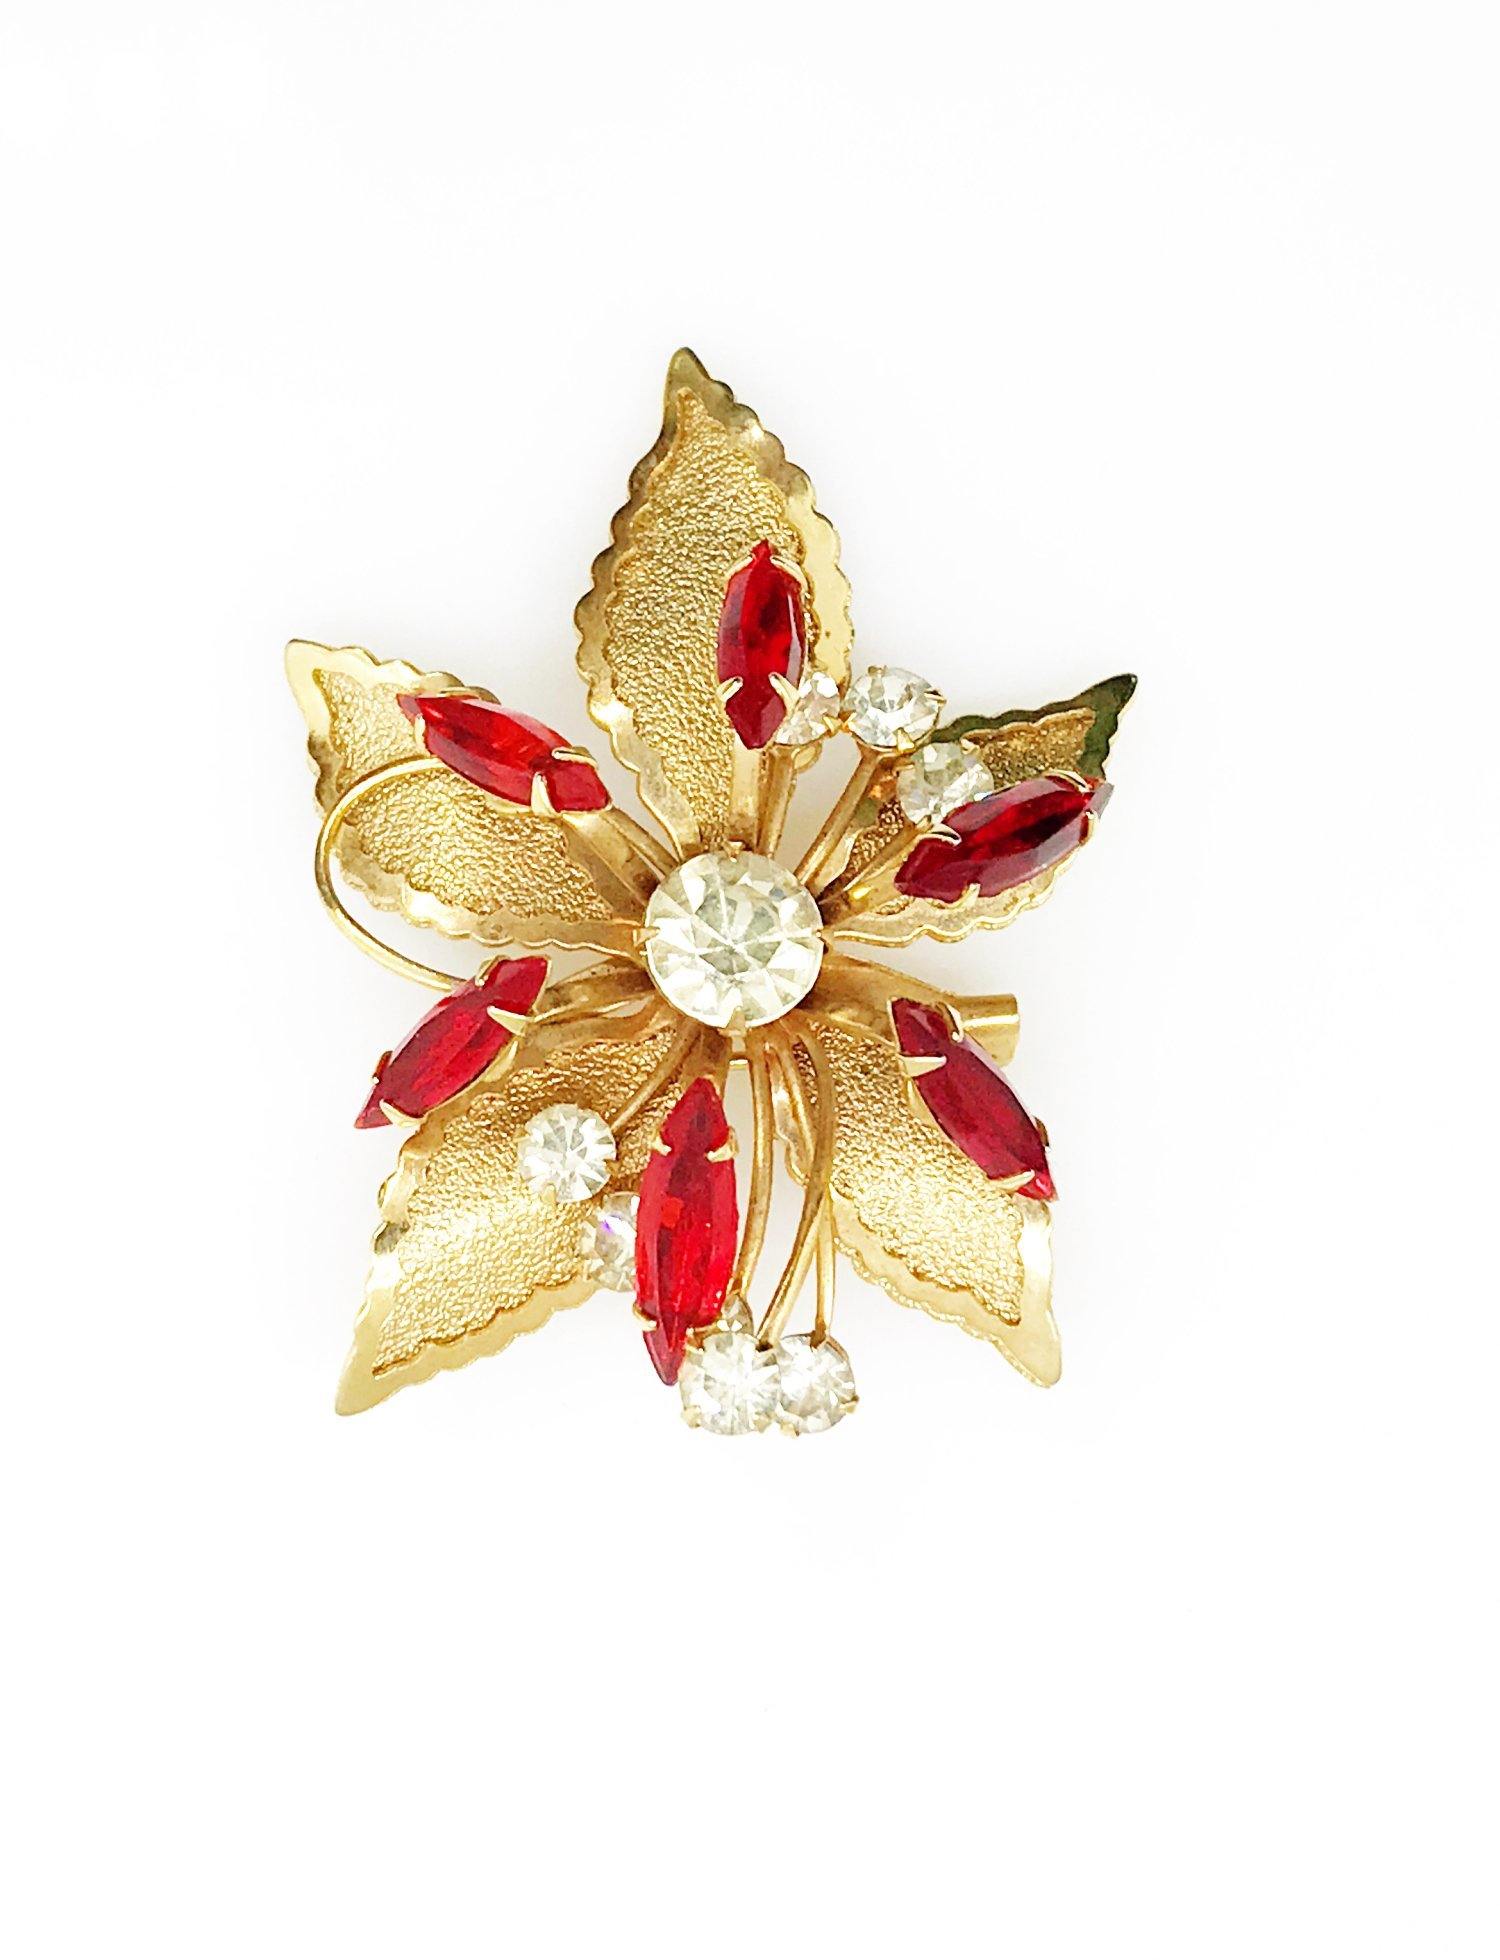 Vintage Gold tone Leaf Brooch with Red and White Stones - Lamoree’s Vintage